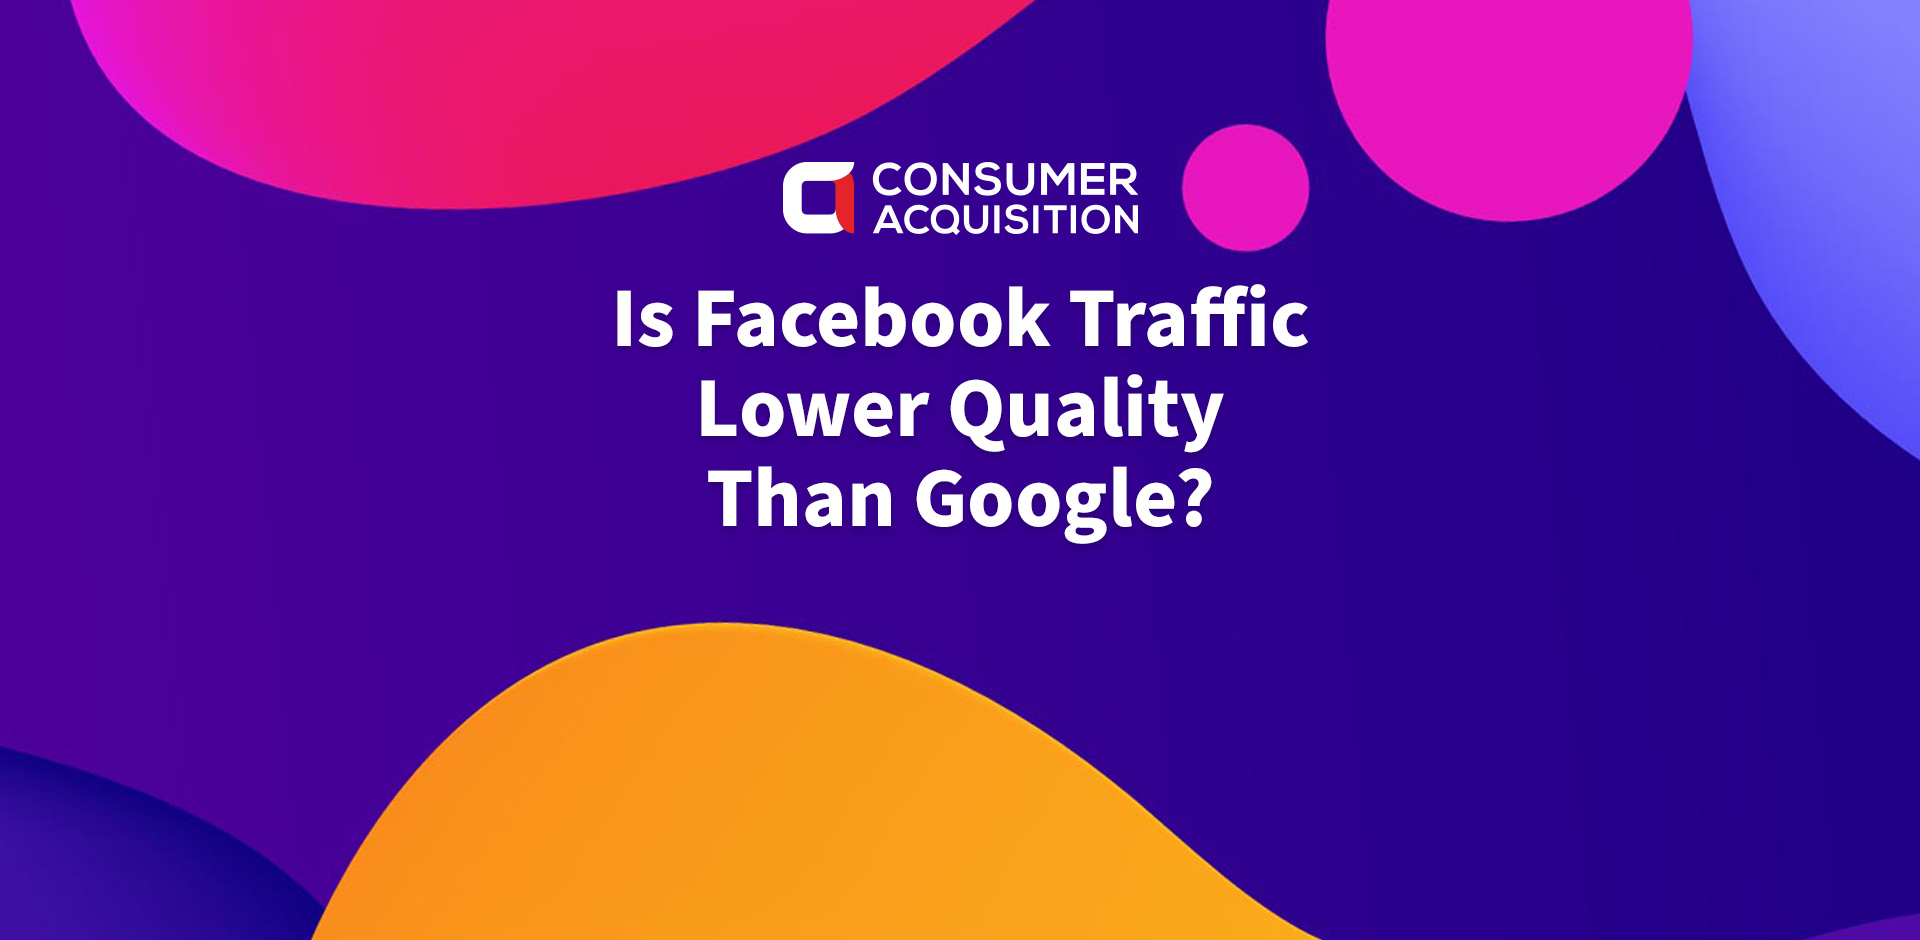 Is Facebook Traffic Lower Quality Than Google?